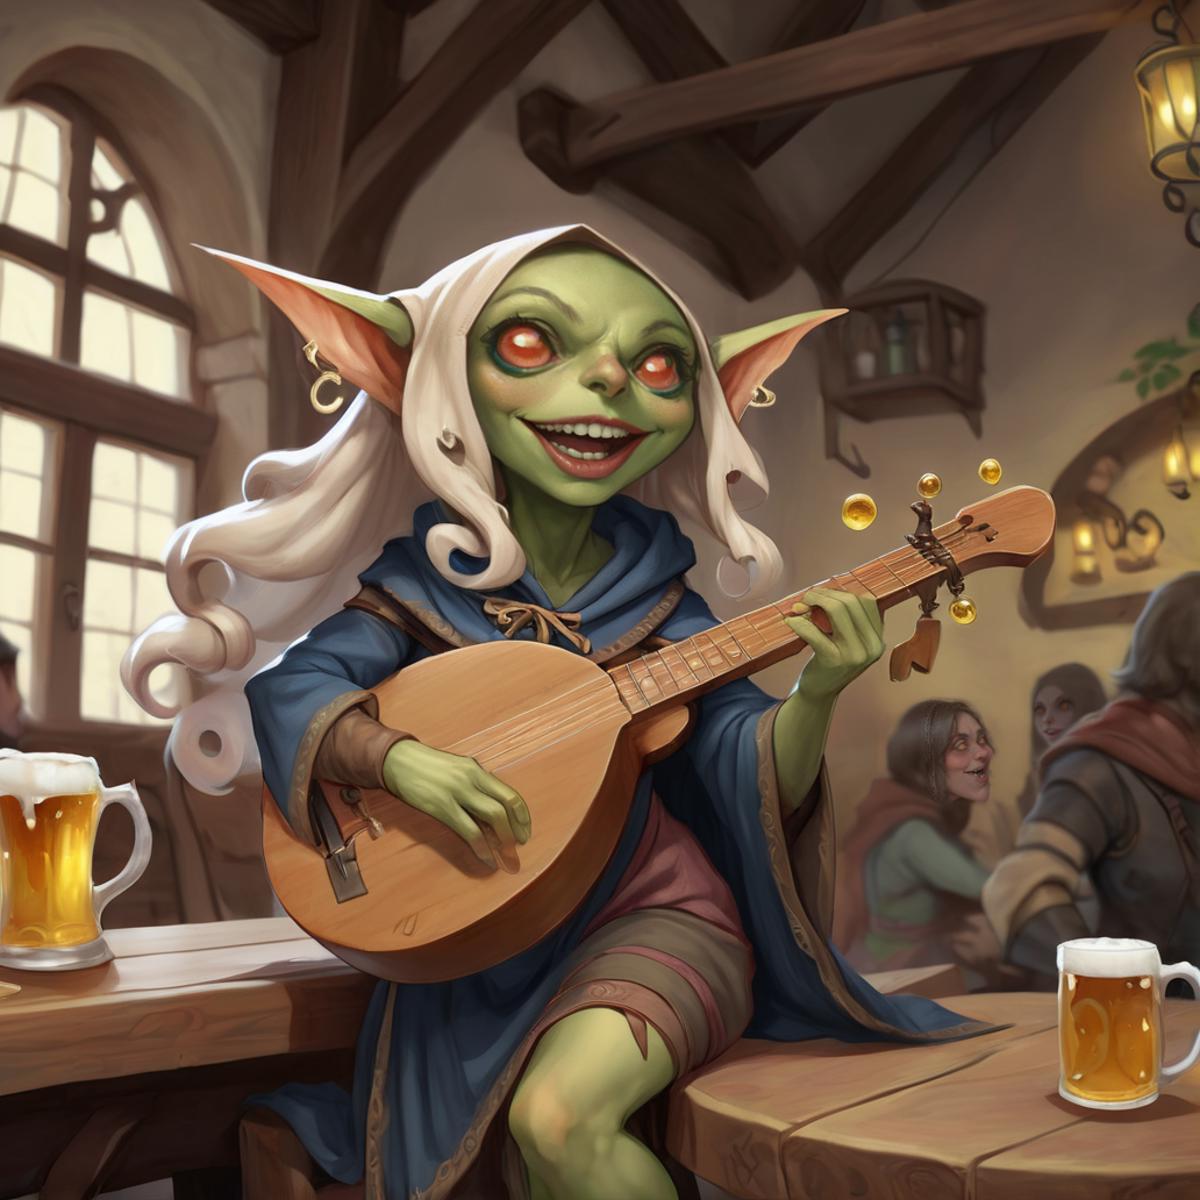 Pathfinder goblin image by Xhad